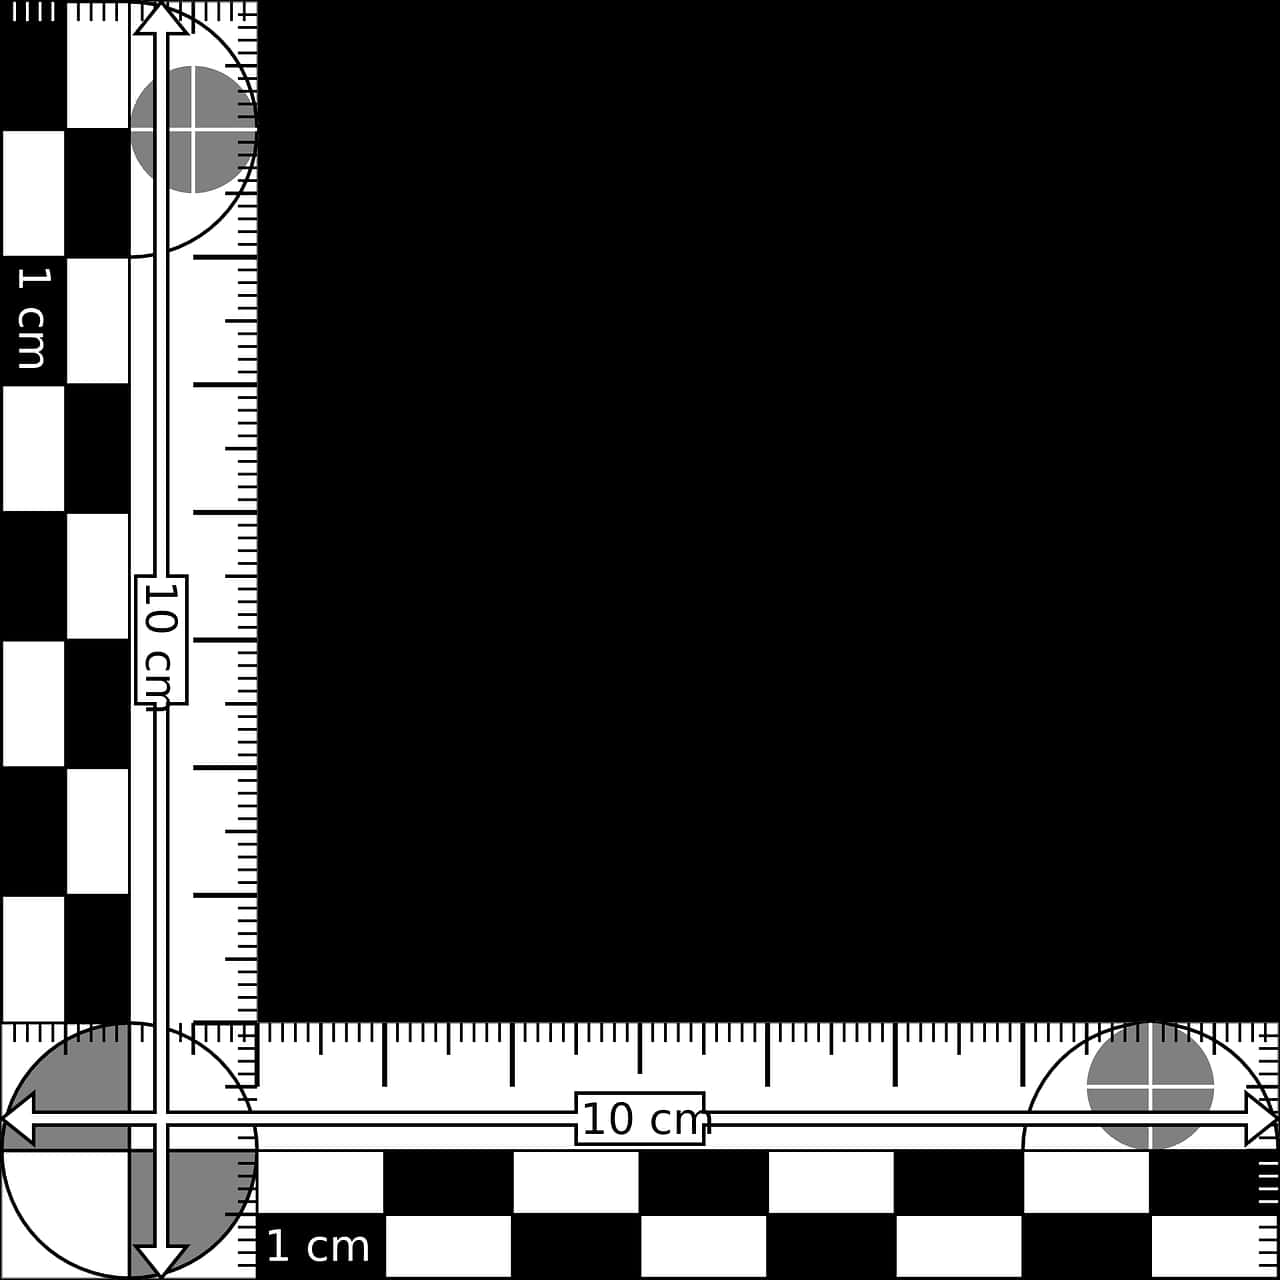 A Black And White Checkered Background With A Ruler And A Black Square